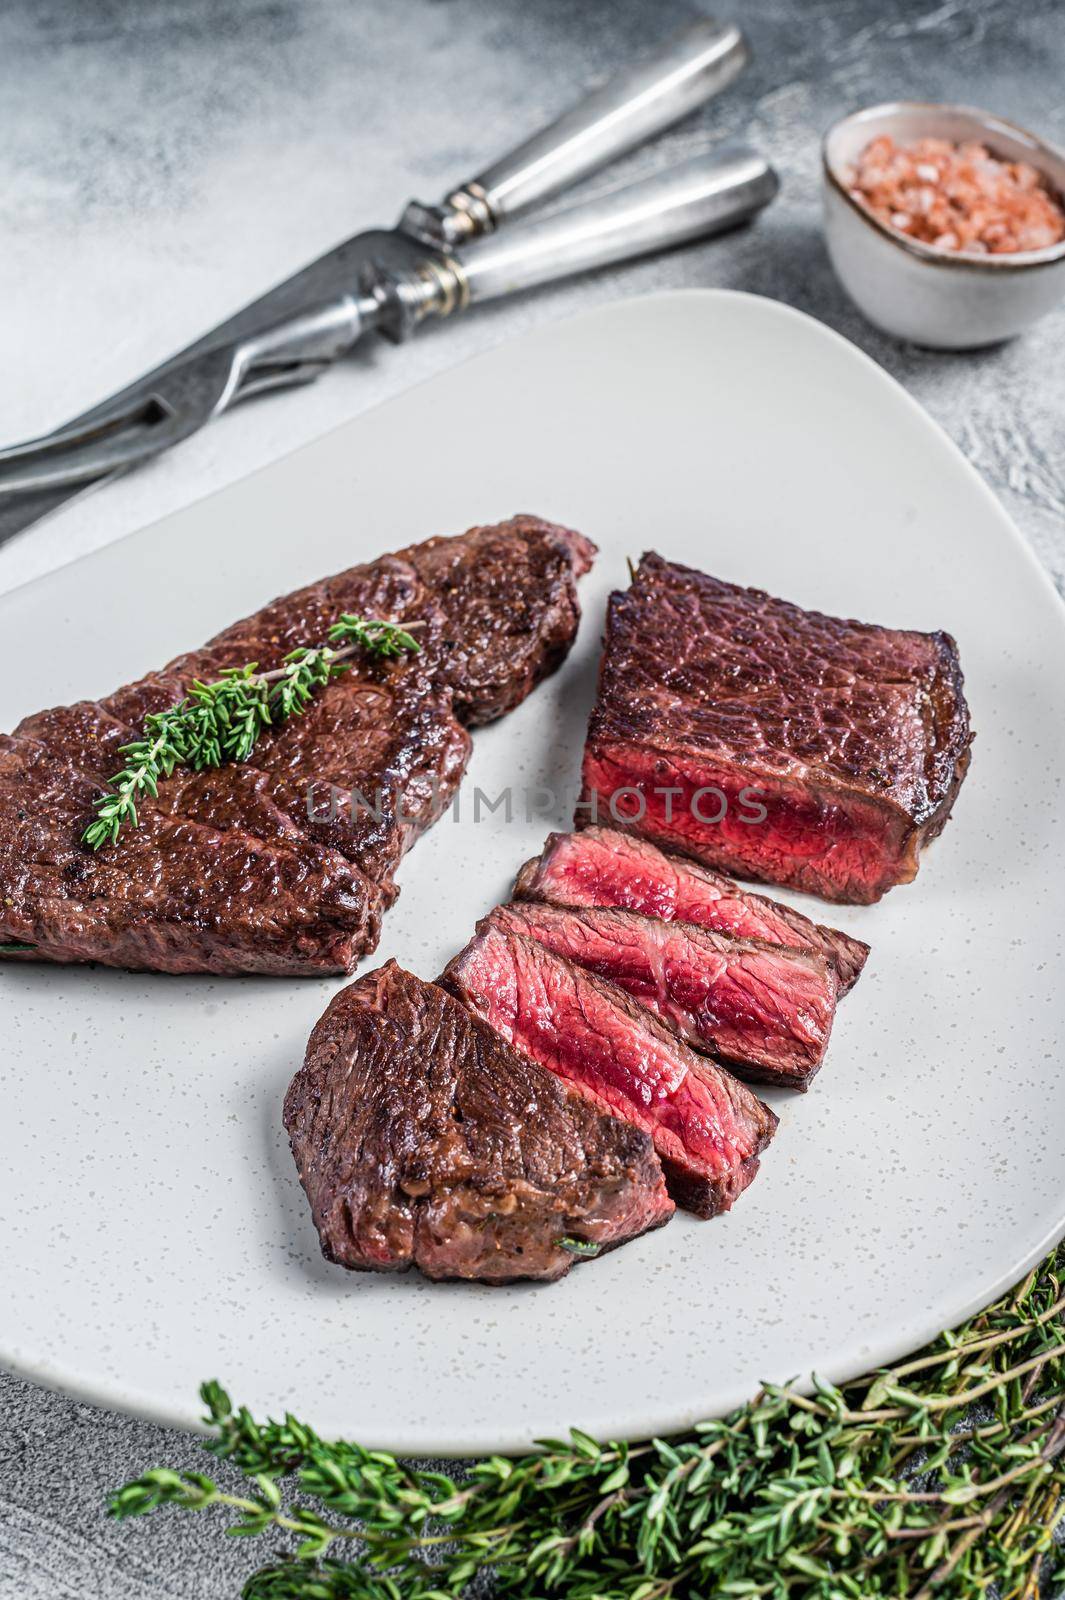 Roasted sliced rump beef meat steak on a plate with thyme. White background. Top view.